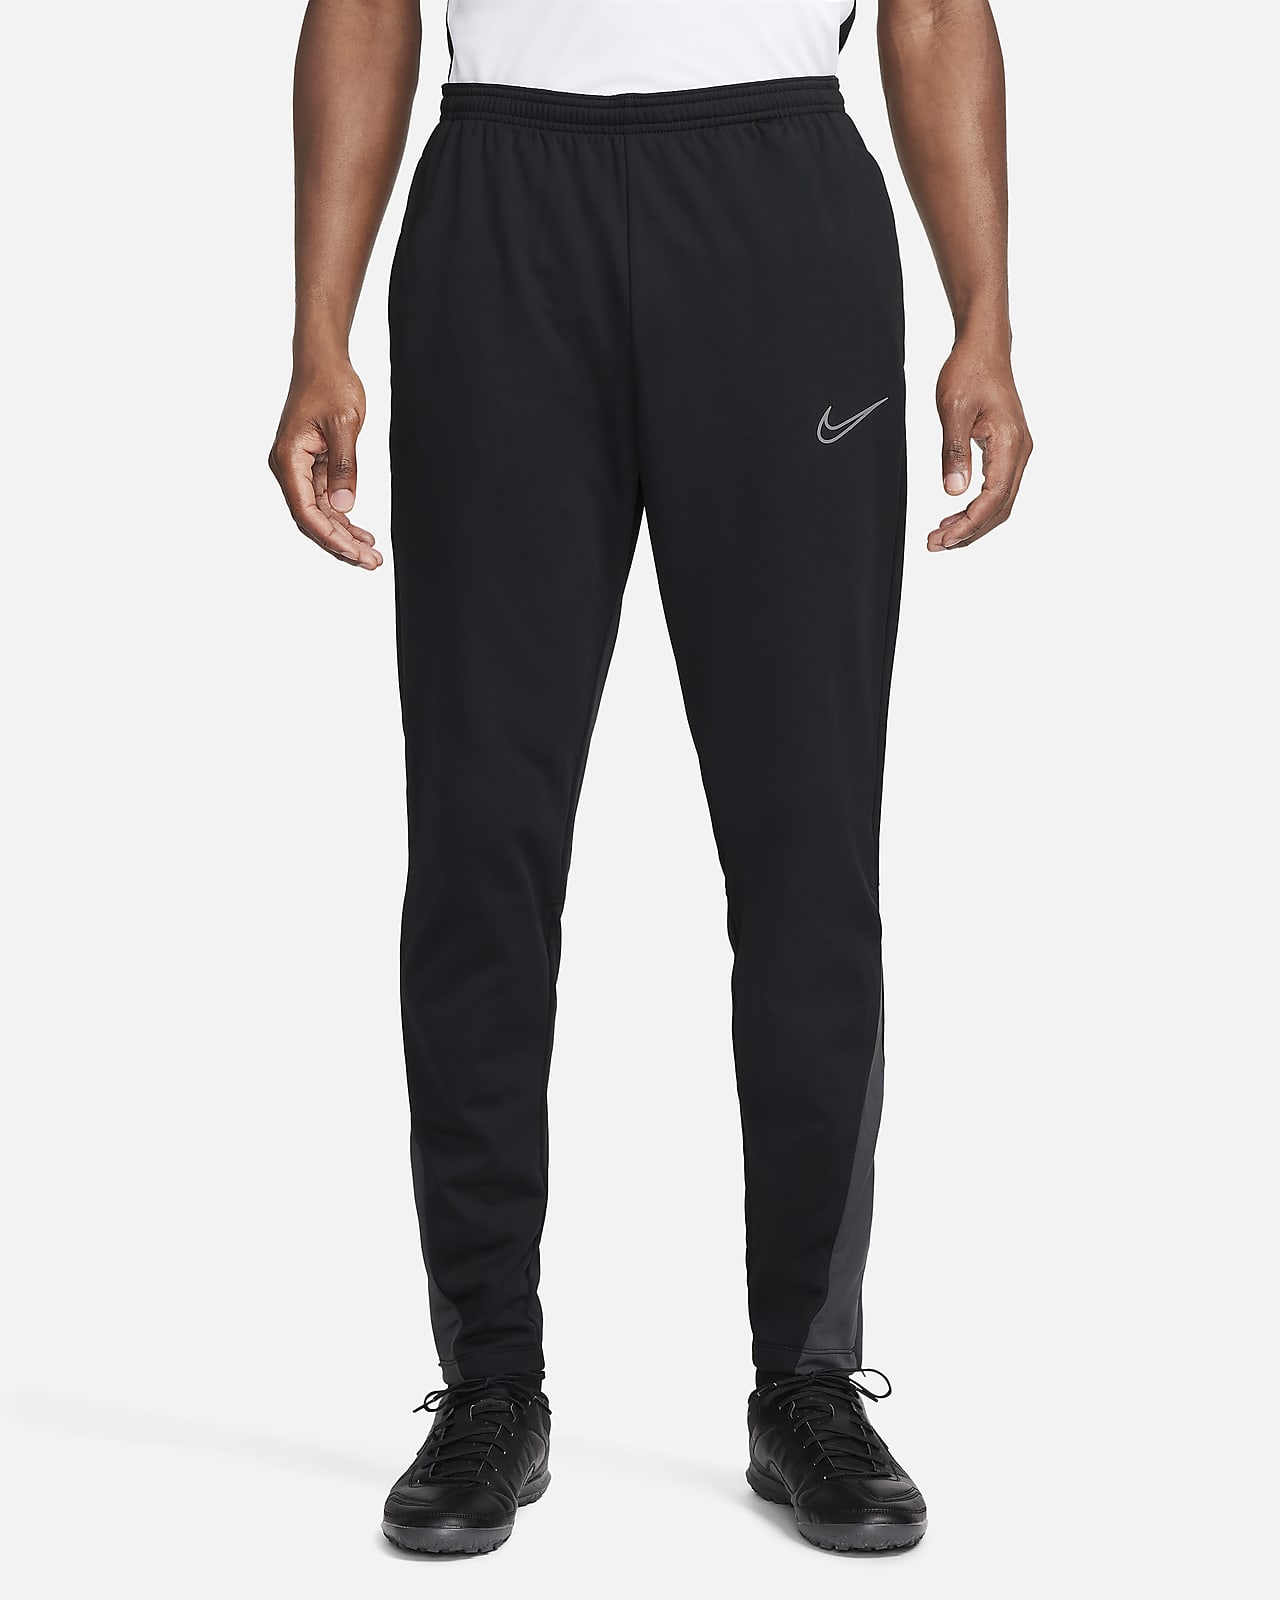 https://static.nike.com/a/images/t_PDP_1280_v1/f_auto,q_auto:eco/92f92549-ffaa-4d34-9ade-5bda184620eb/academy-winter-warrior-mens-therma-fit-soccer-pants-8CmFP8.png